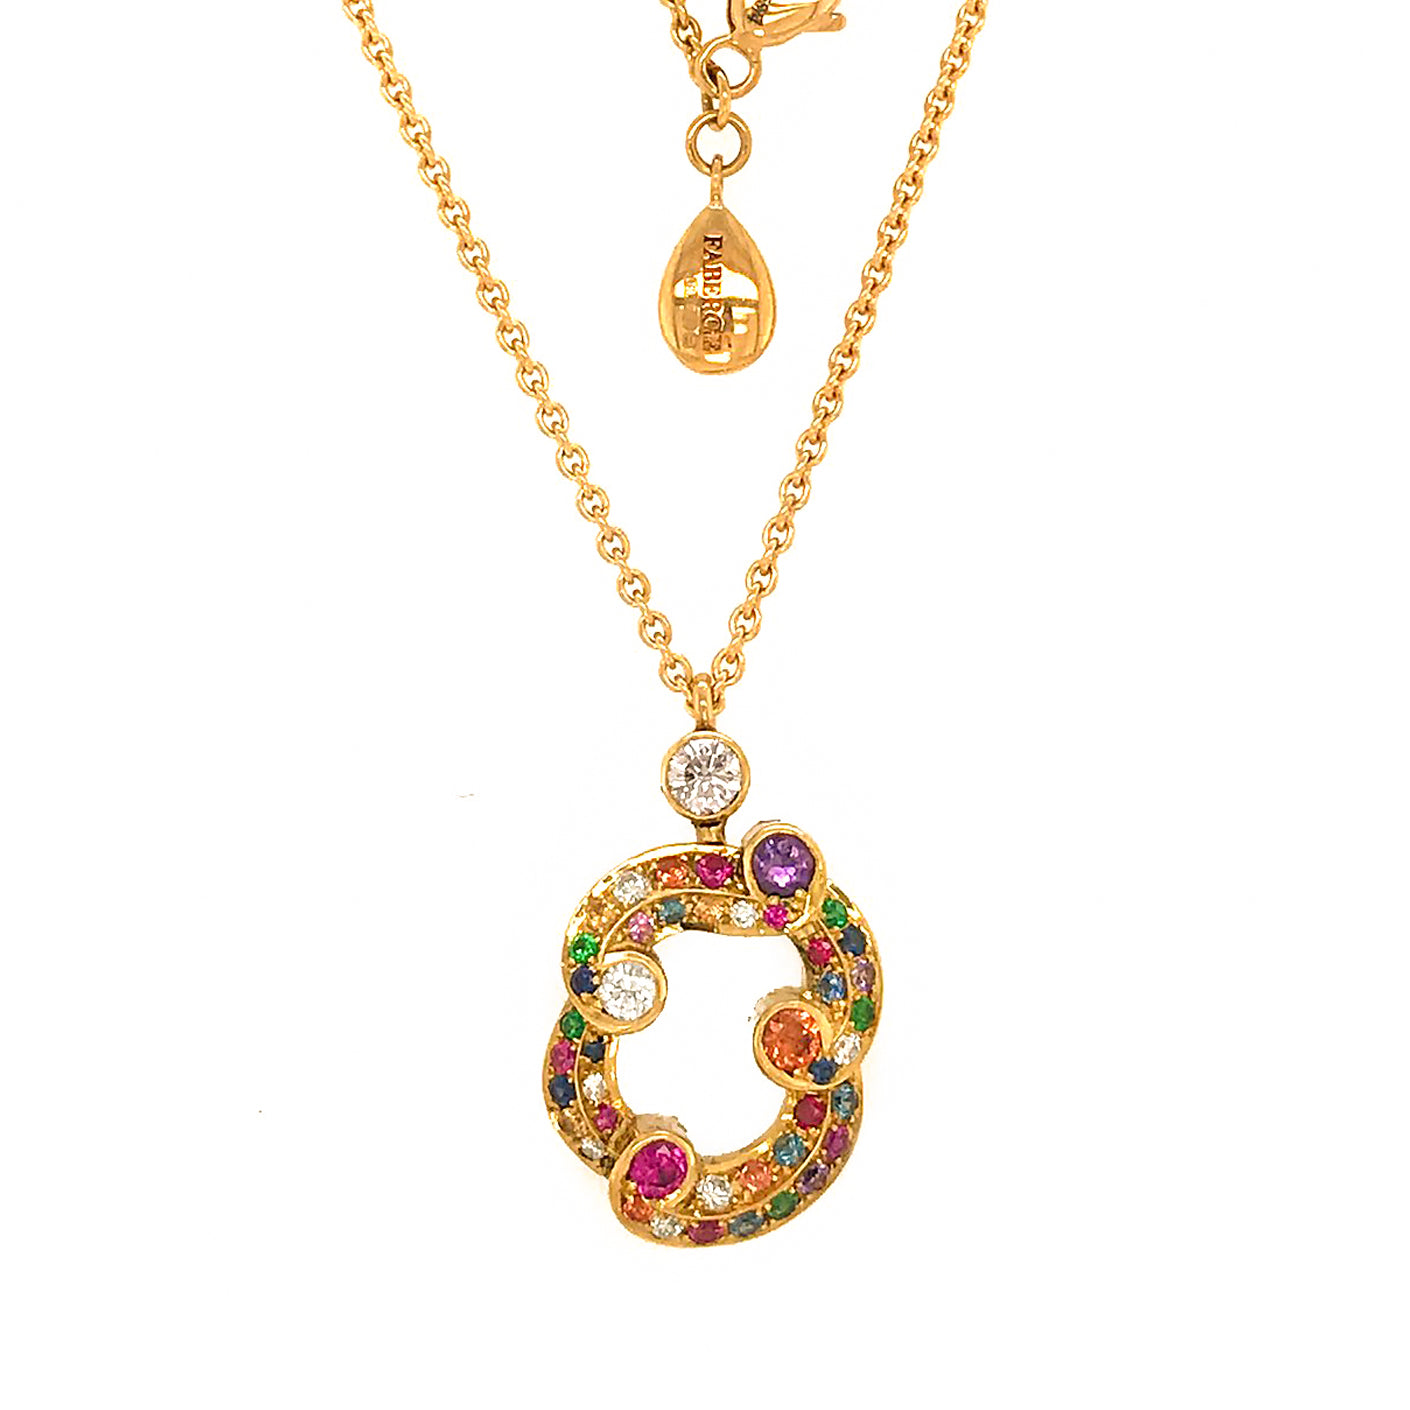 Fabergé Diamond Pendant Necklace with Sapphires and Gemstones